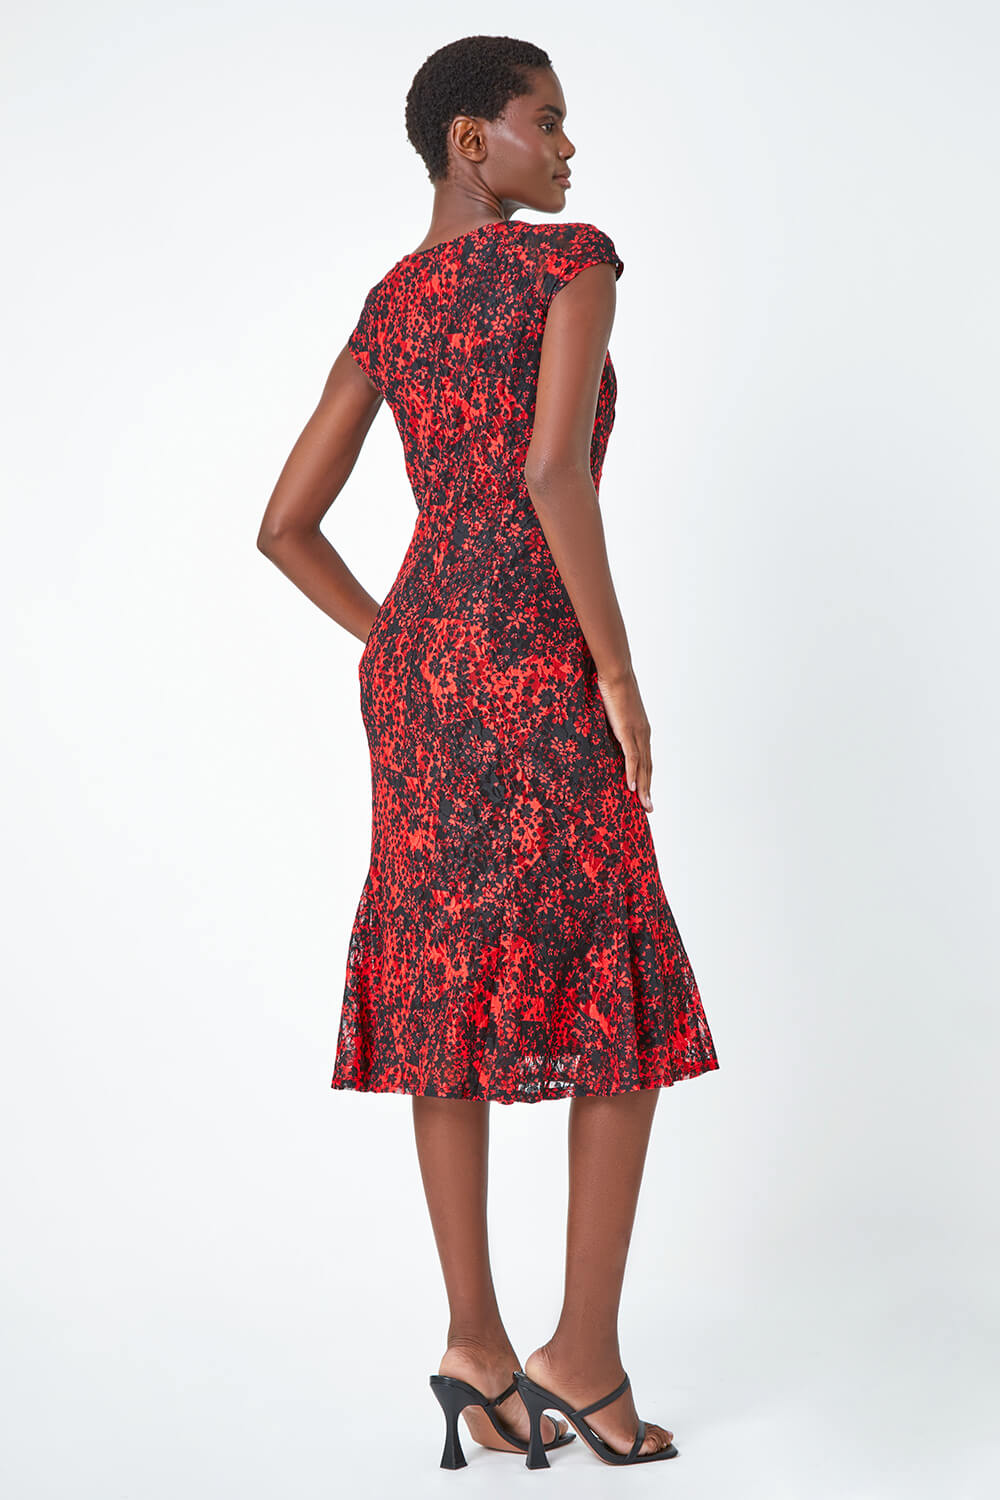 Red Ditsy Floral Stretch Lace Dress, Image 3 of 5